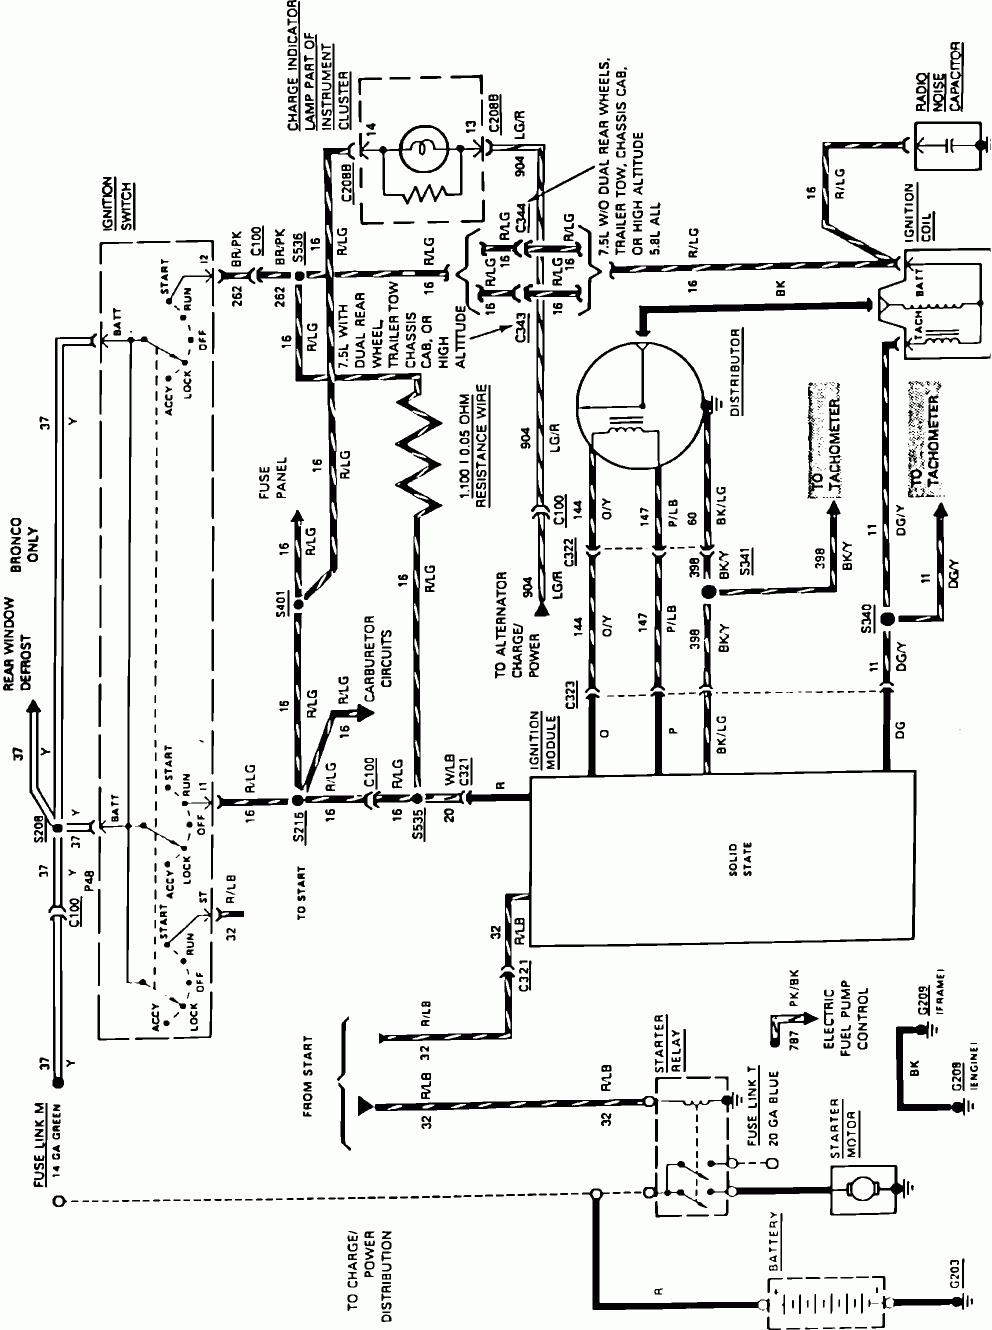 86 Ford Starter Wiring Wiring Diagram Networks